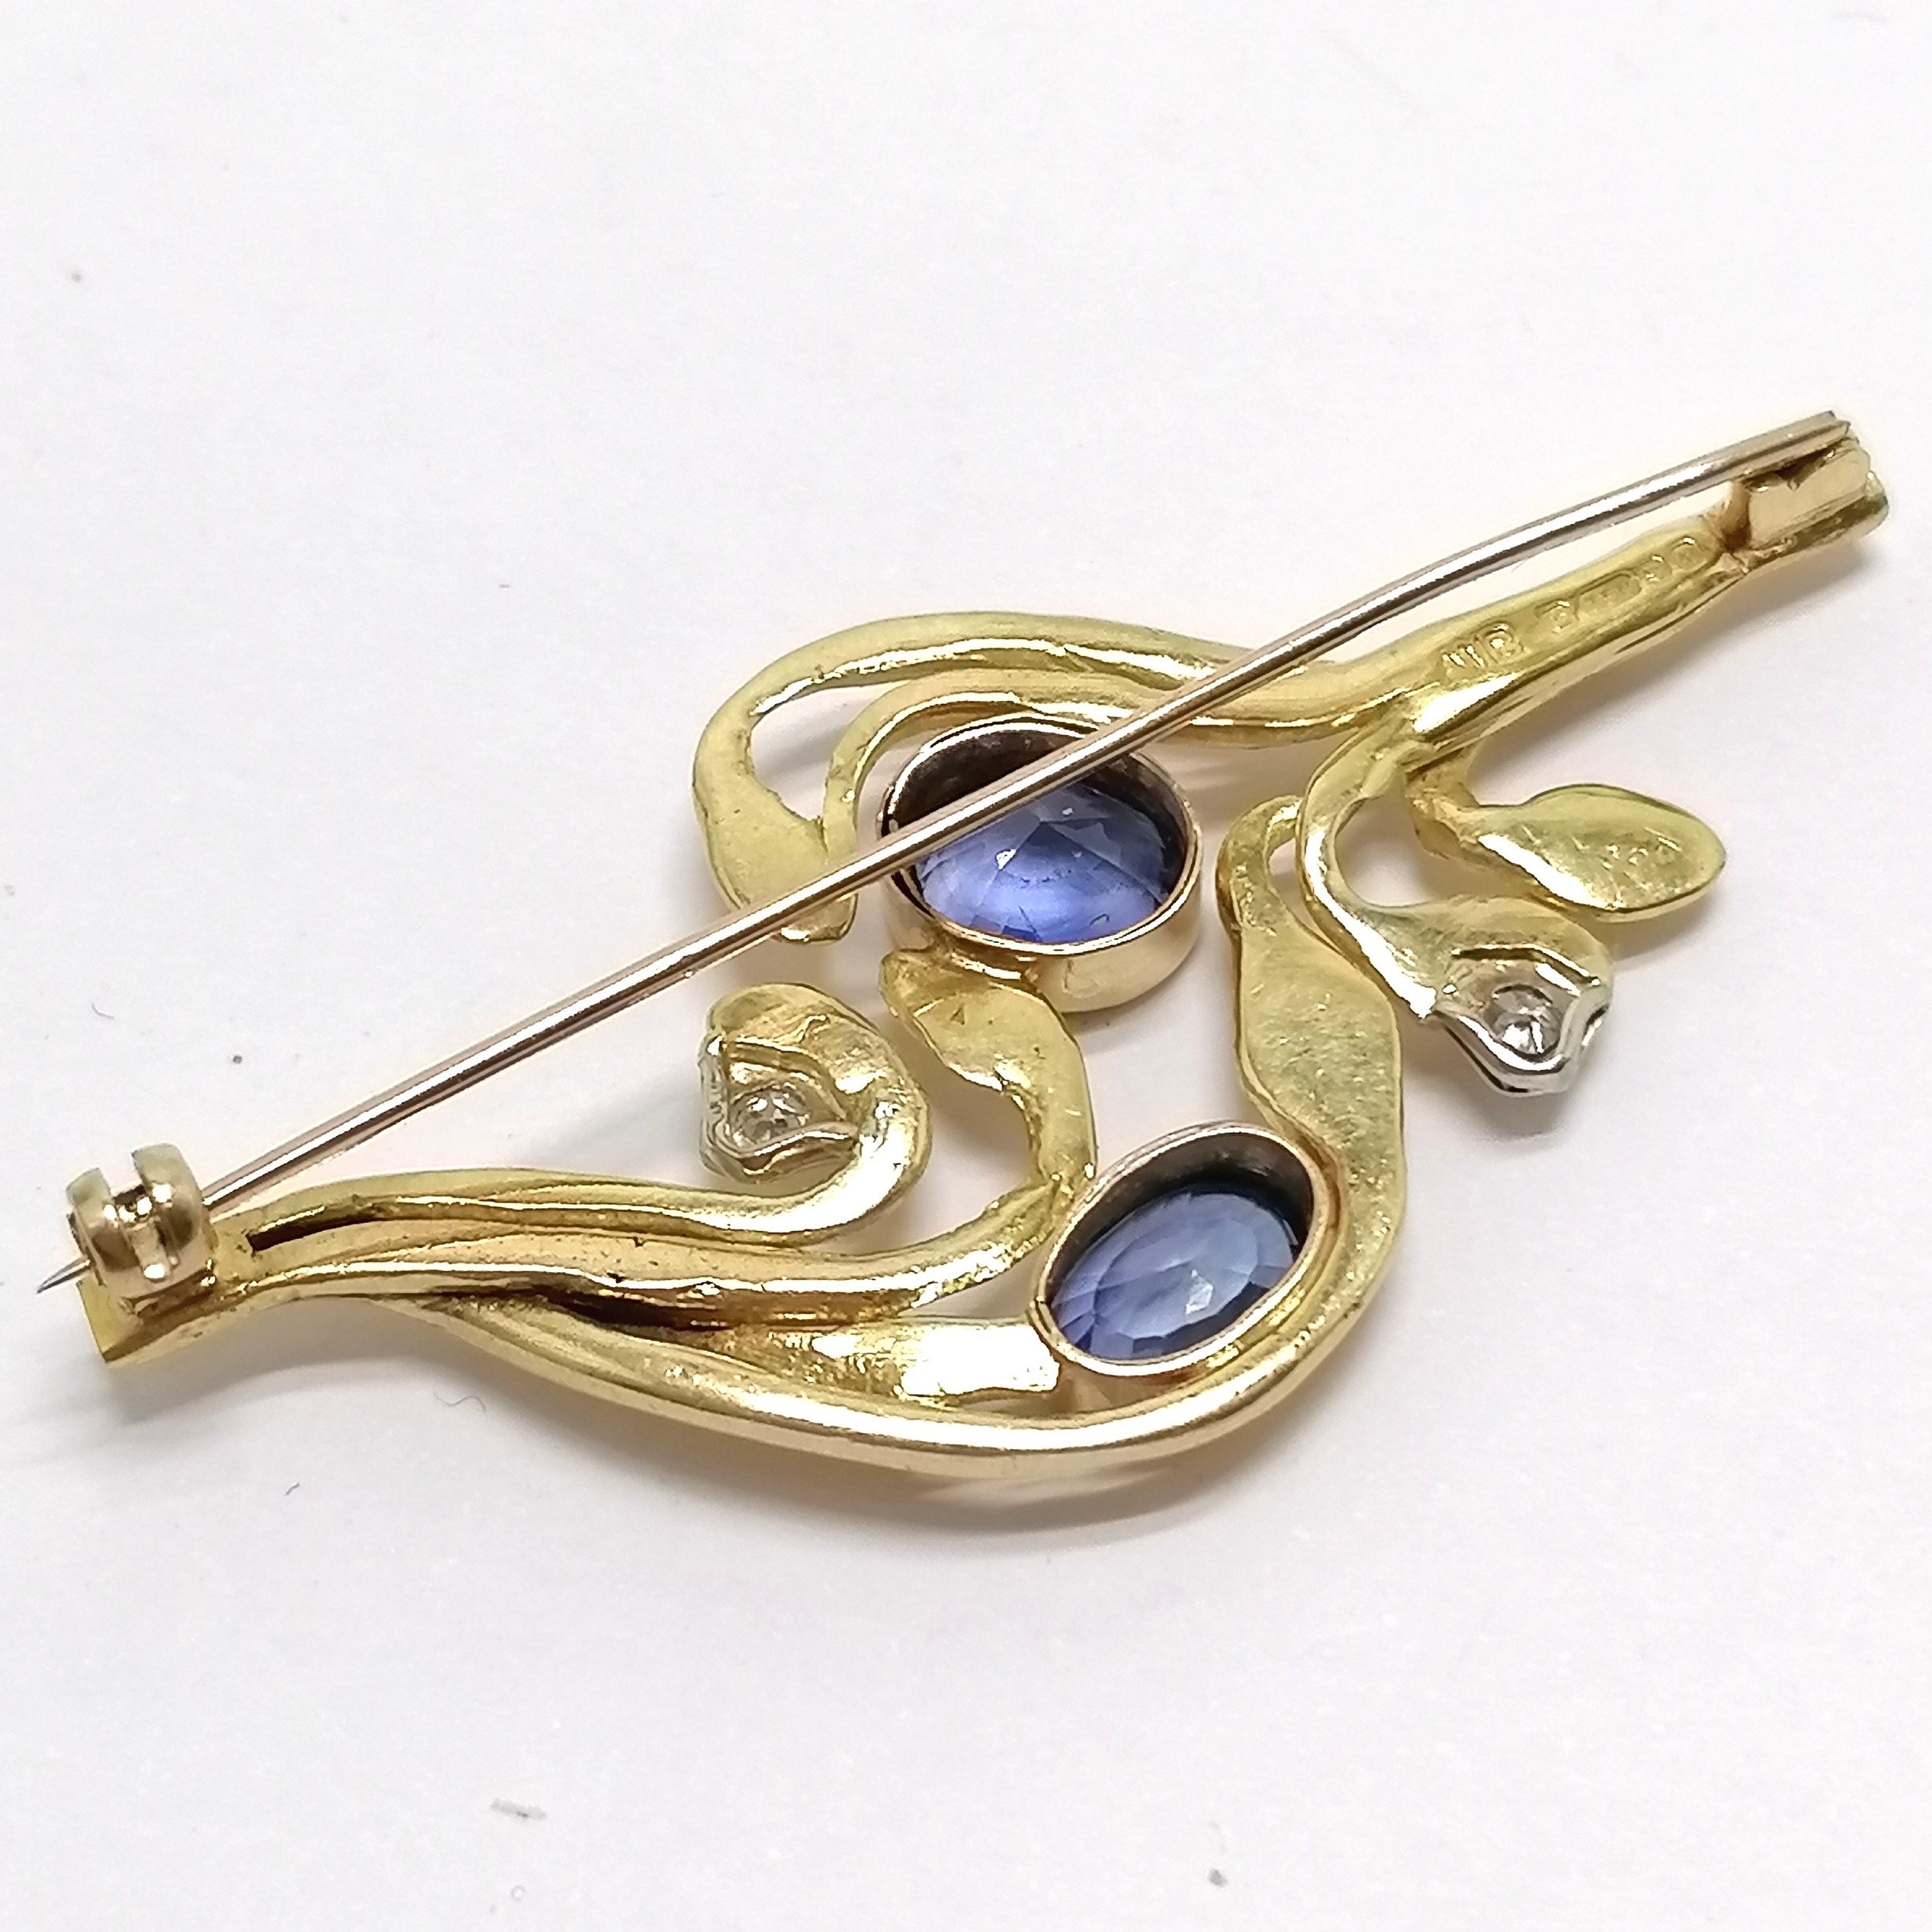 18ct hallmarked gold diamond / sapphire brooch - 5.5cm & 9.8g total weight - Image 2 of 3